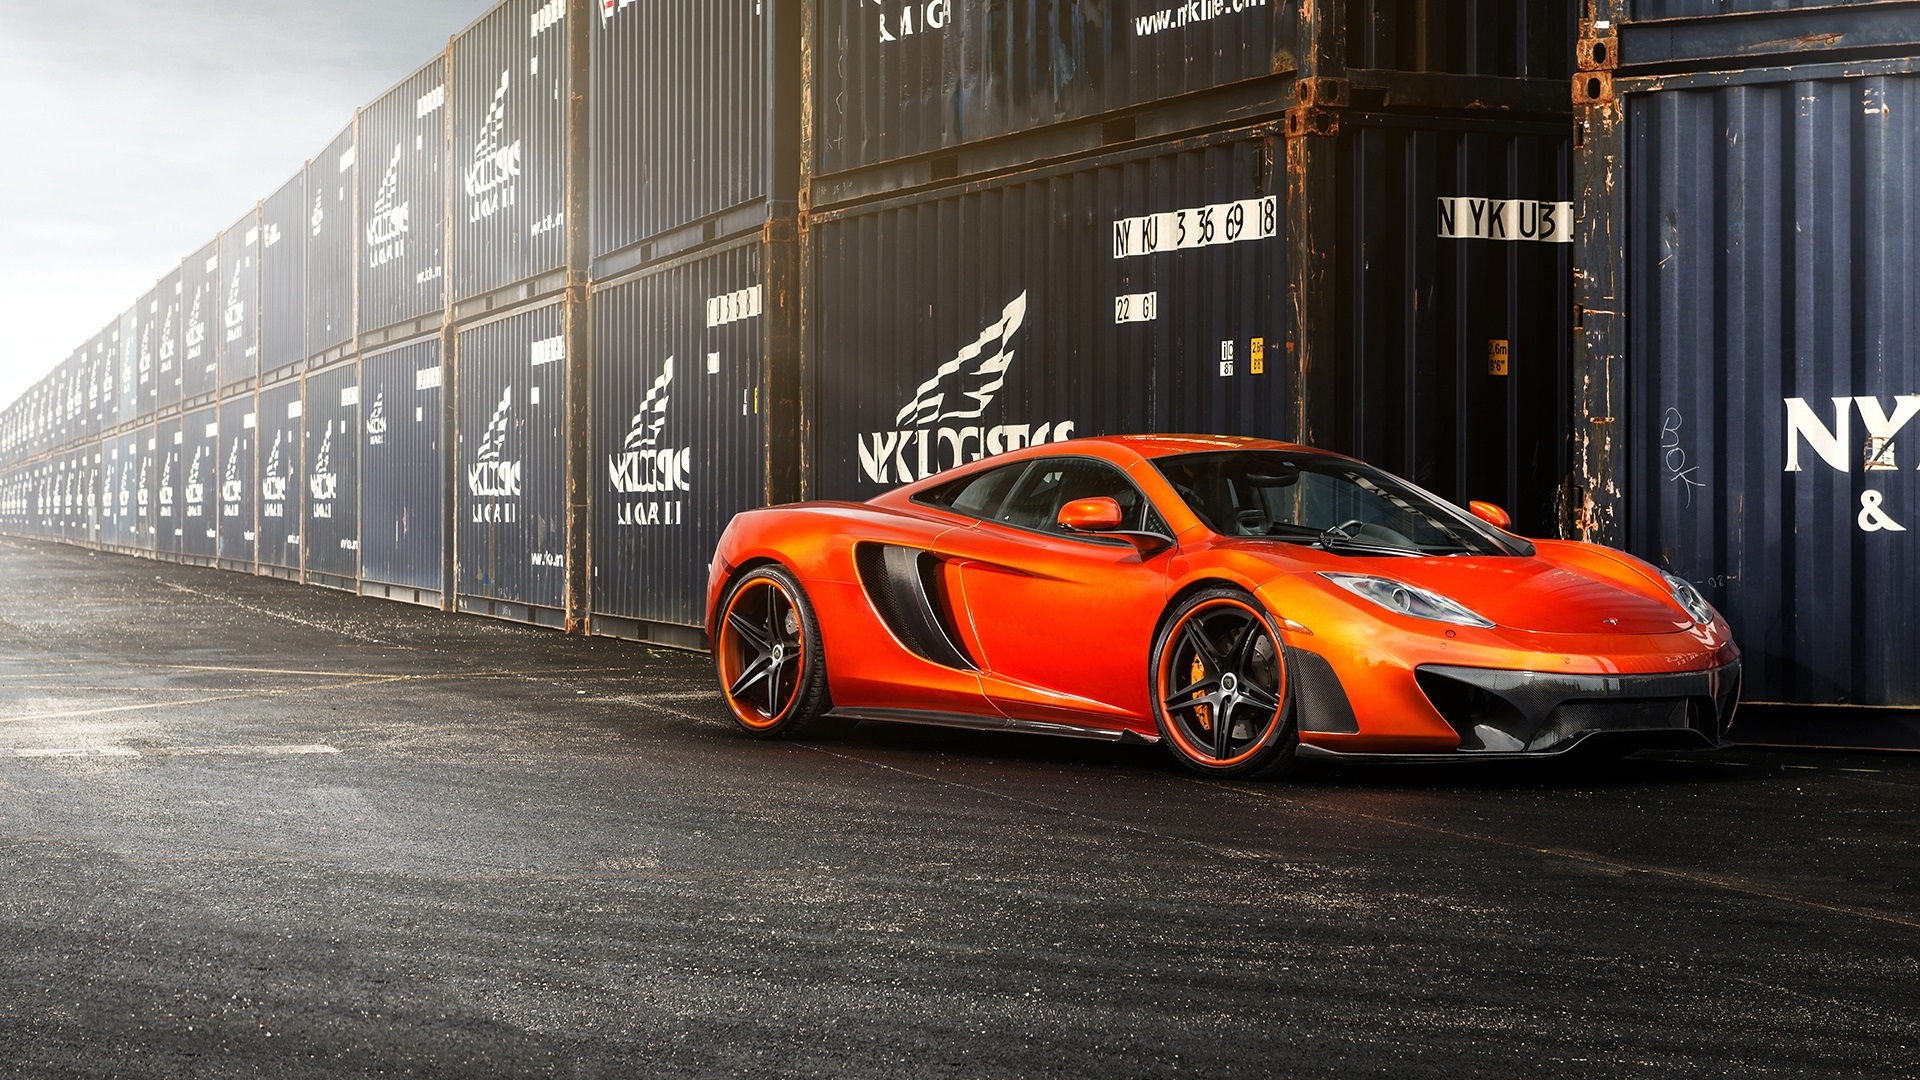 Mclaren Mp4-vx Orange Supercar Side View Container - Supercar In Container , HD Wallpaper & Backgrounds